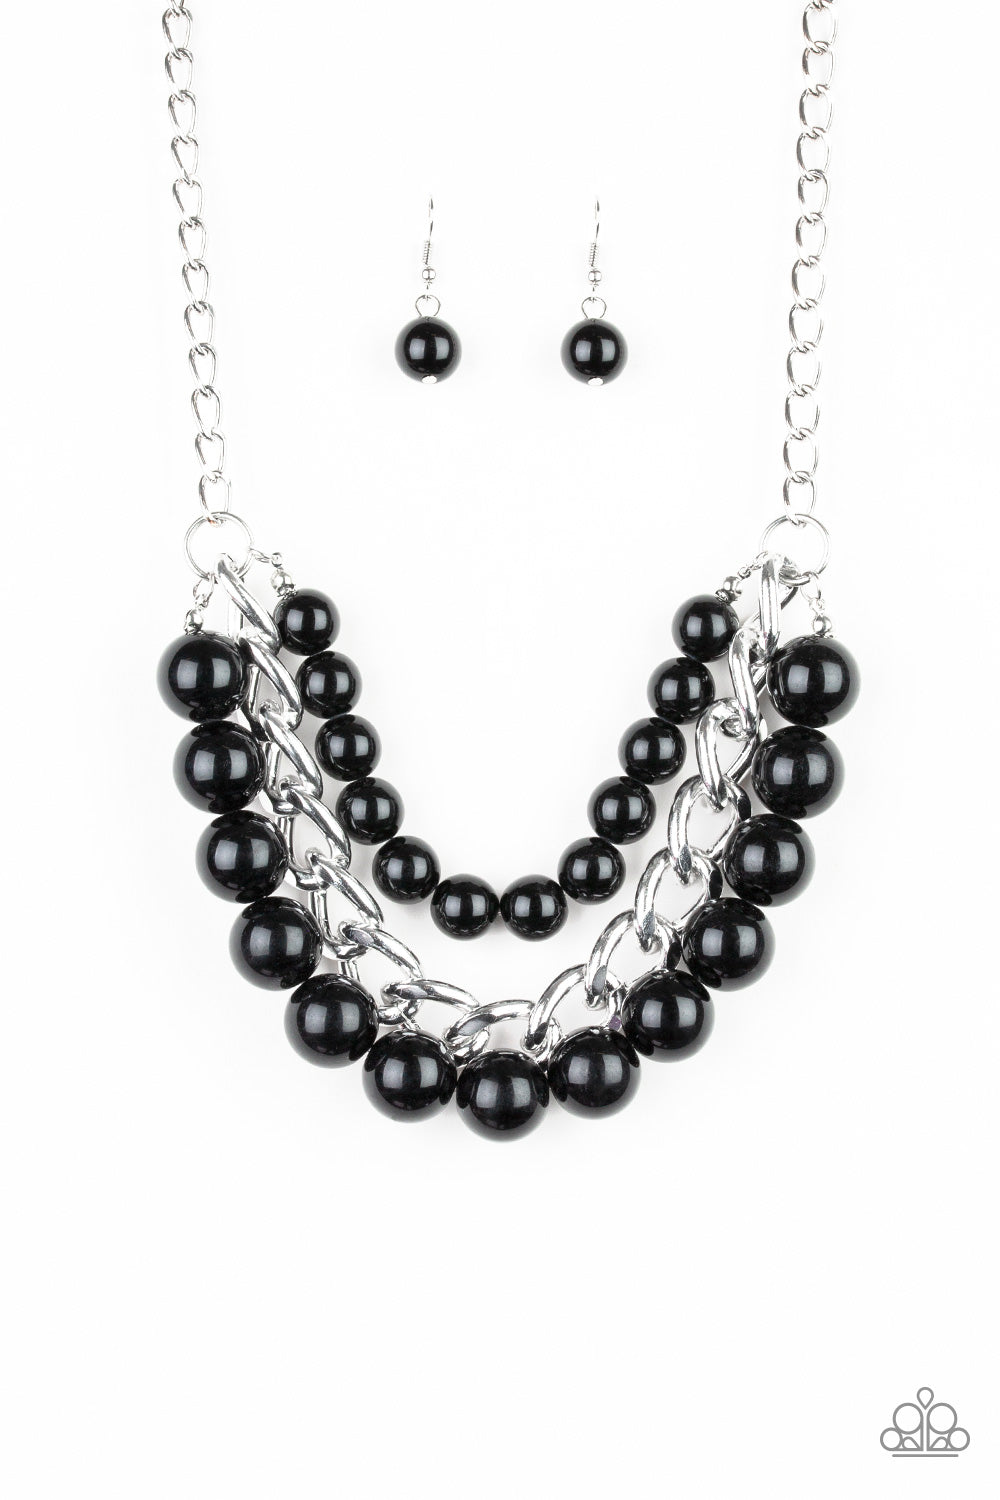 Empire State Empress - Black and Silver Necklace - Paparazzi Accessories - Two strands of dramatic black beads flank one strand of oversized silver chain, creating statement-making layers below the collar. Features an adjustable clasp closure. Sold as one individual necklace.